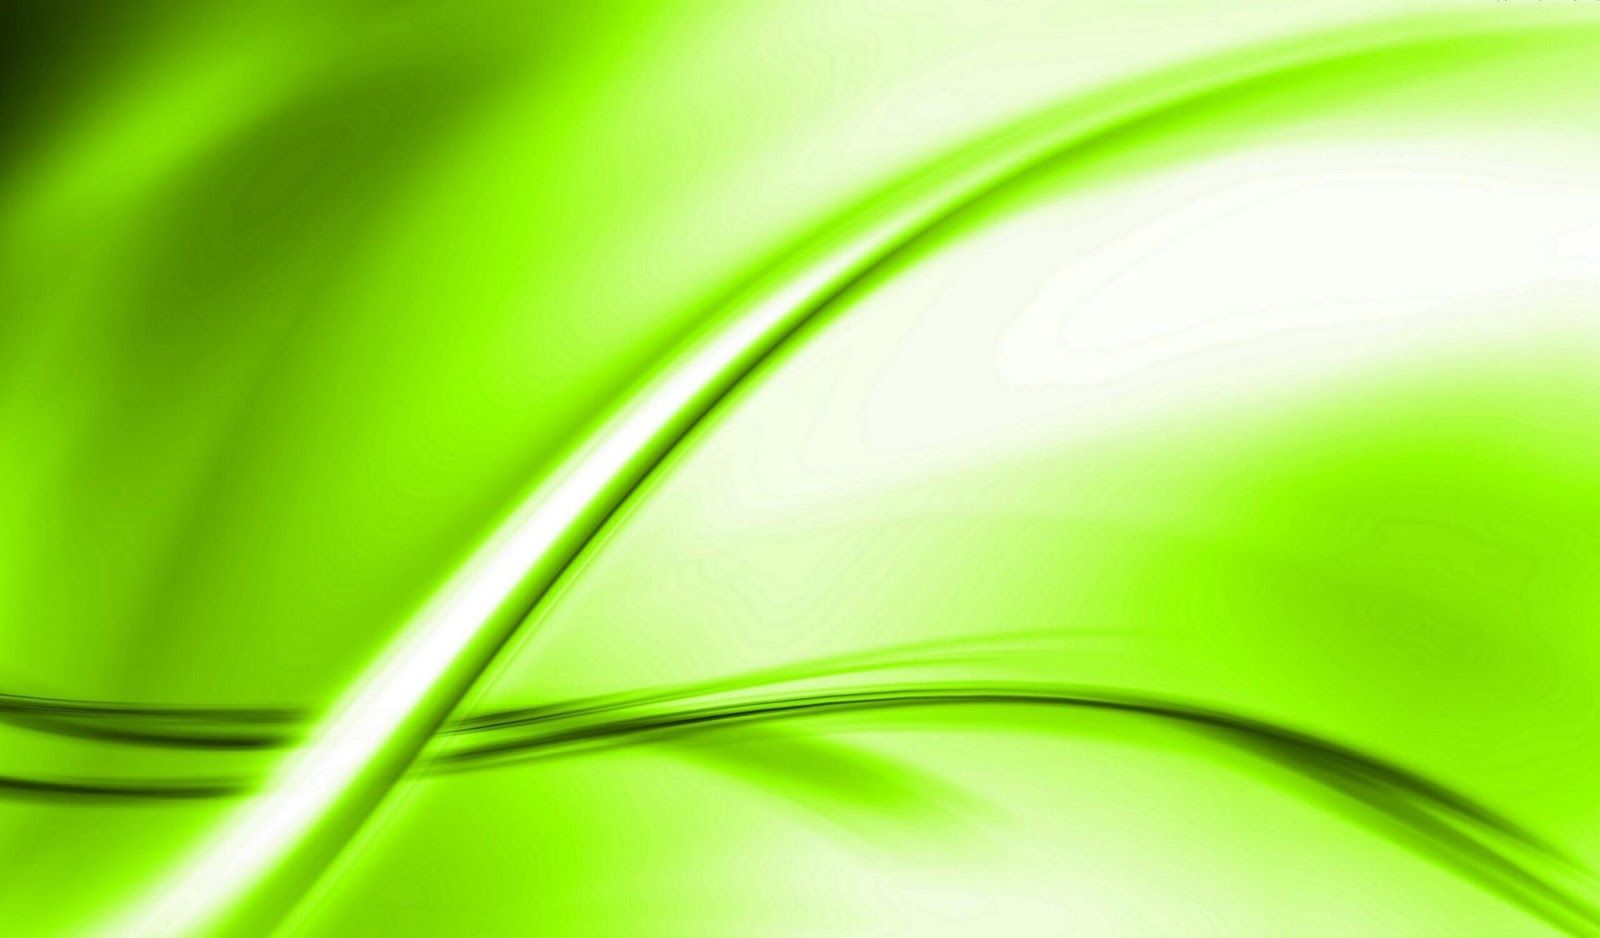 1600x938 Light Green Abstract Background Hd Image 3 Green Background Light Green Background Design